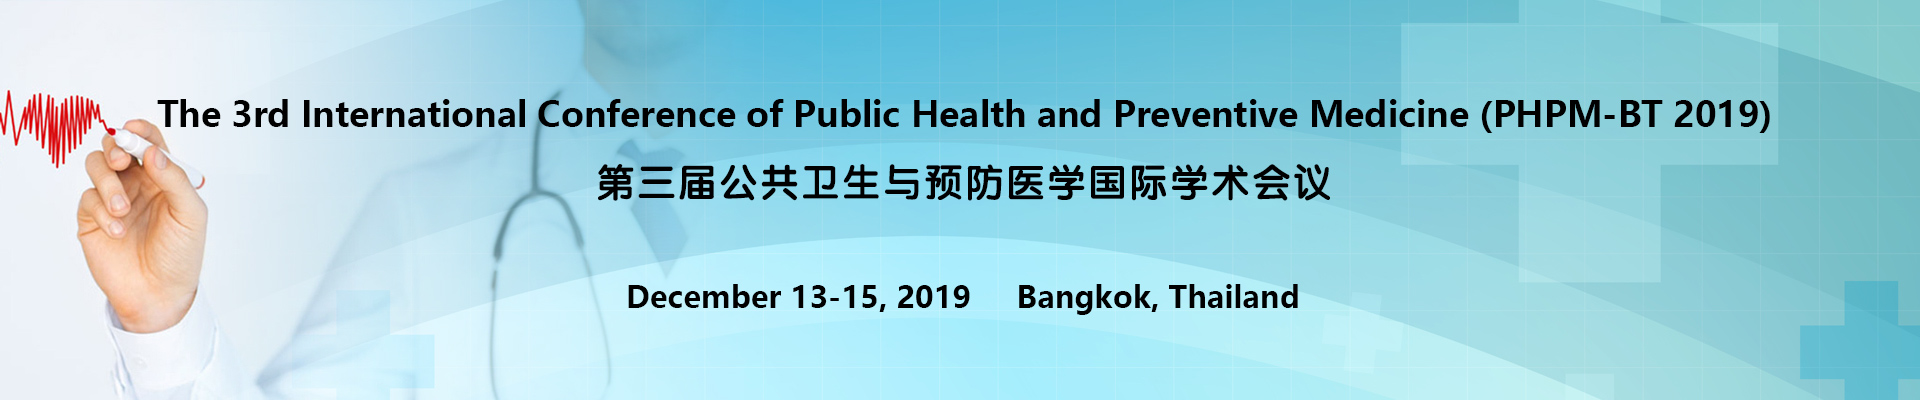 The 3rd International Conference of Public Health and Preventive Medicine (PHPM-BT 2019), Bangkok, Thailand